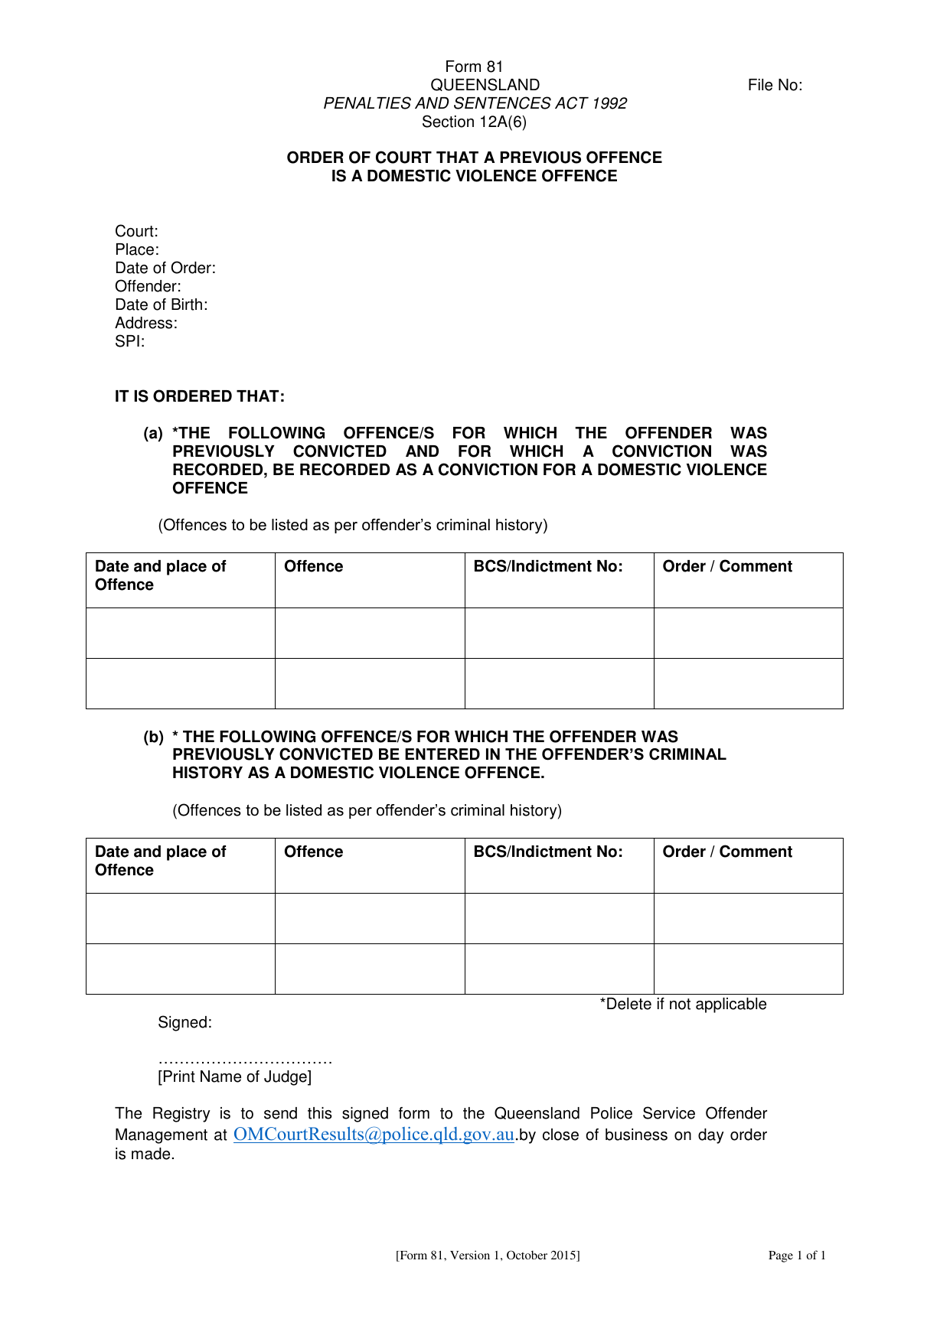 Form 81 Order of Court That a Previous Offence Is a Domestic Violence Offence - Queensland, Australia, Page 1